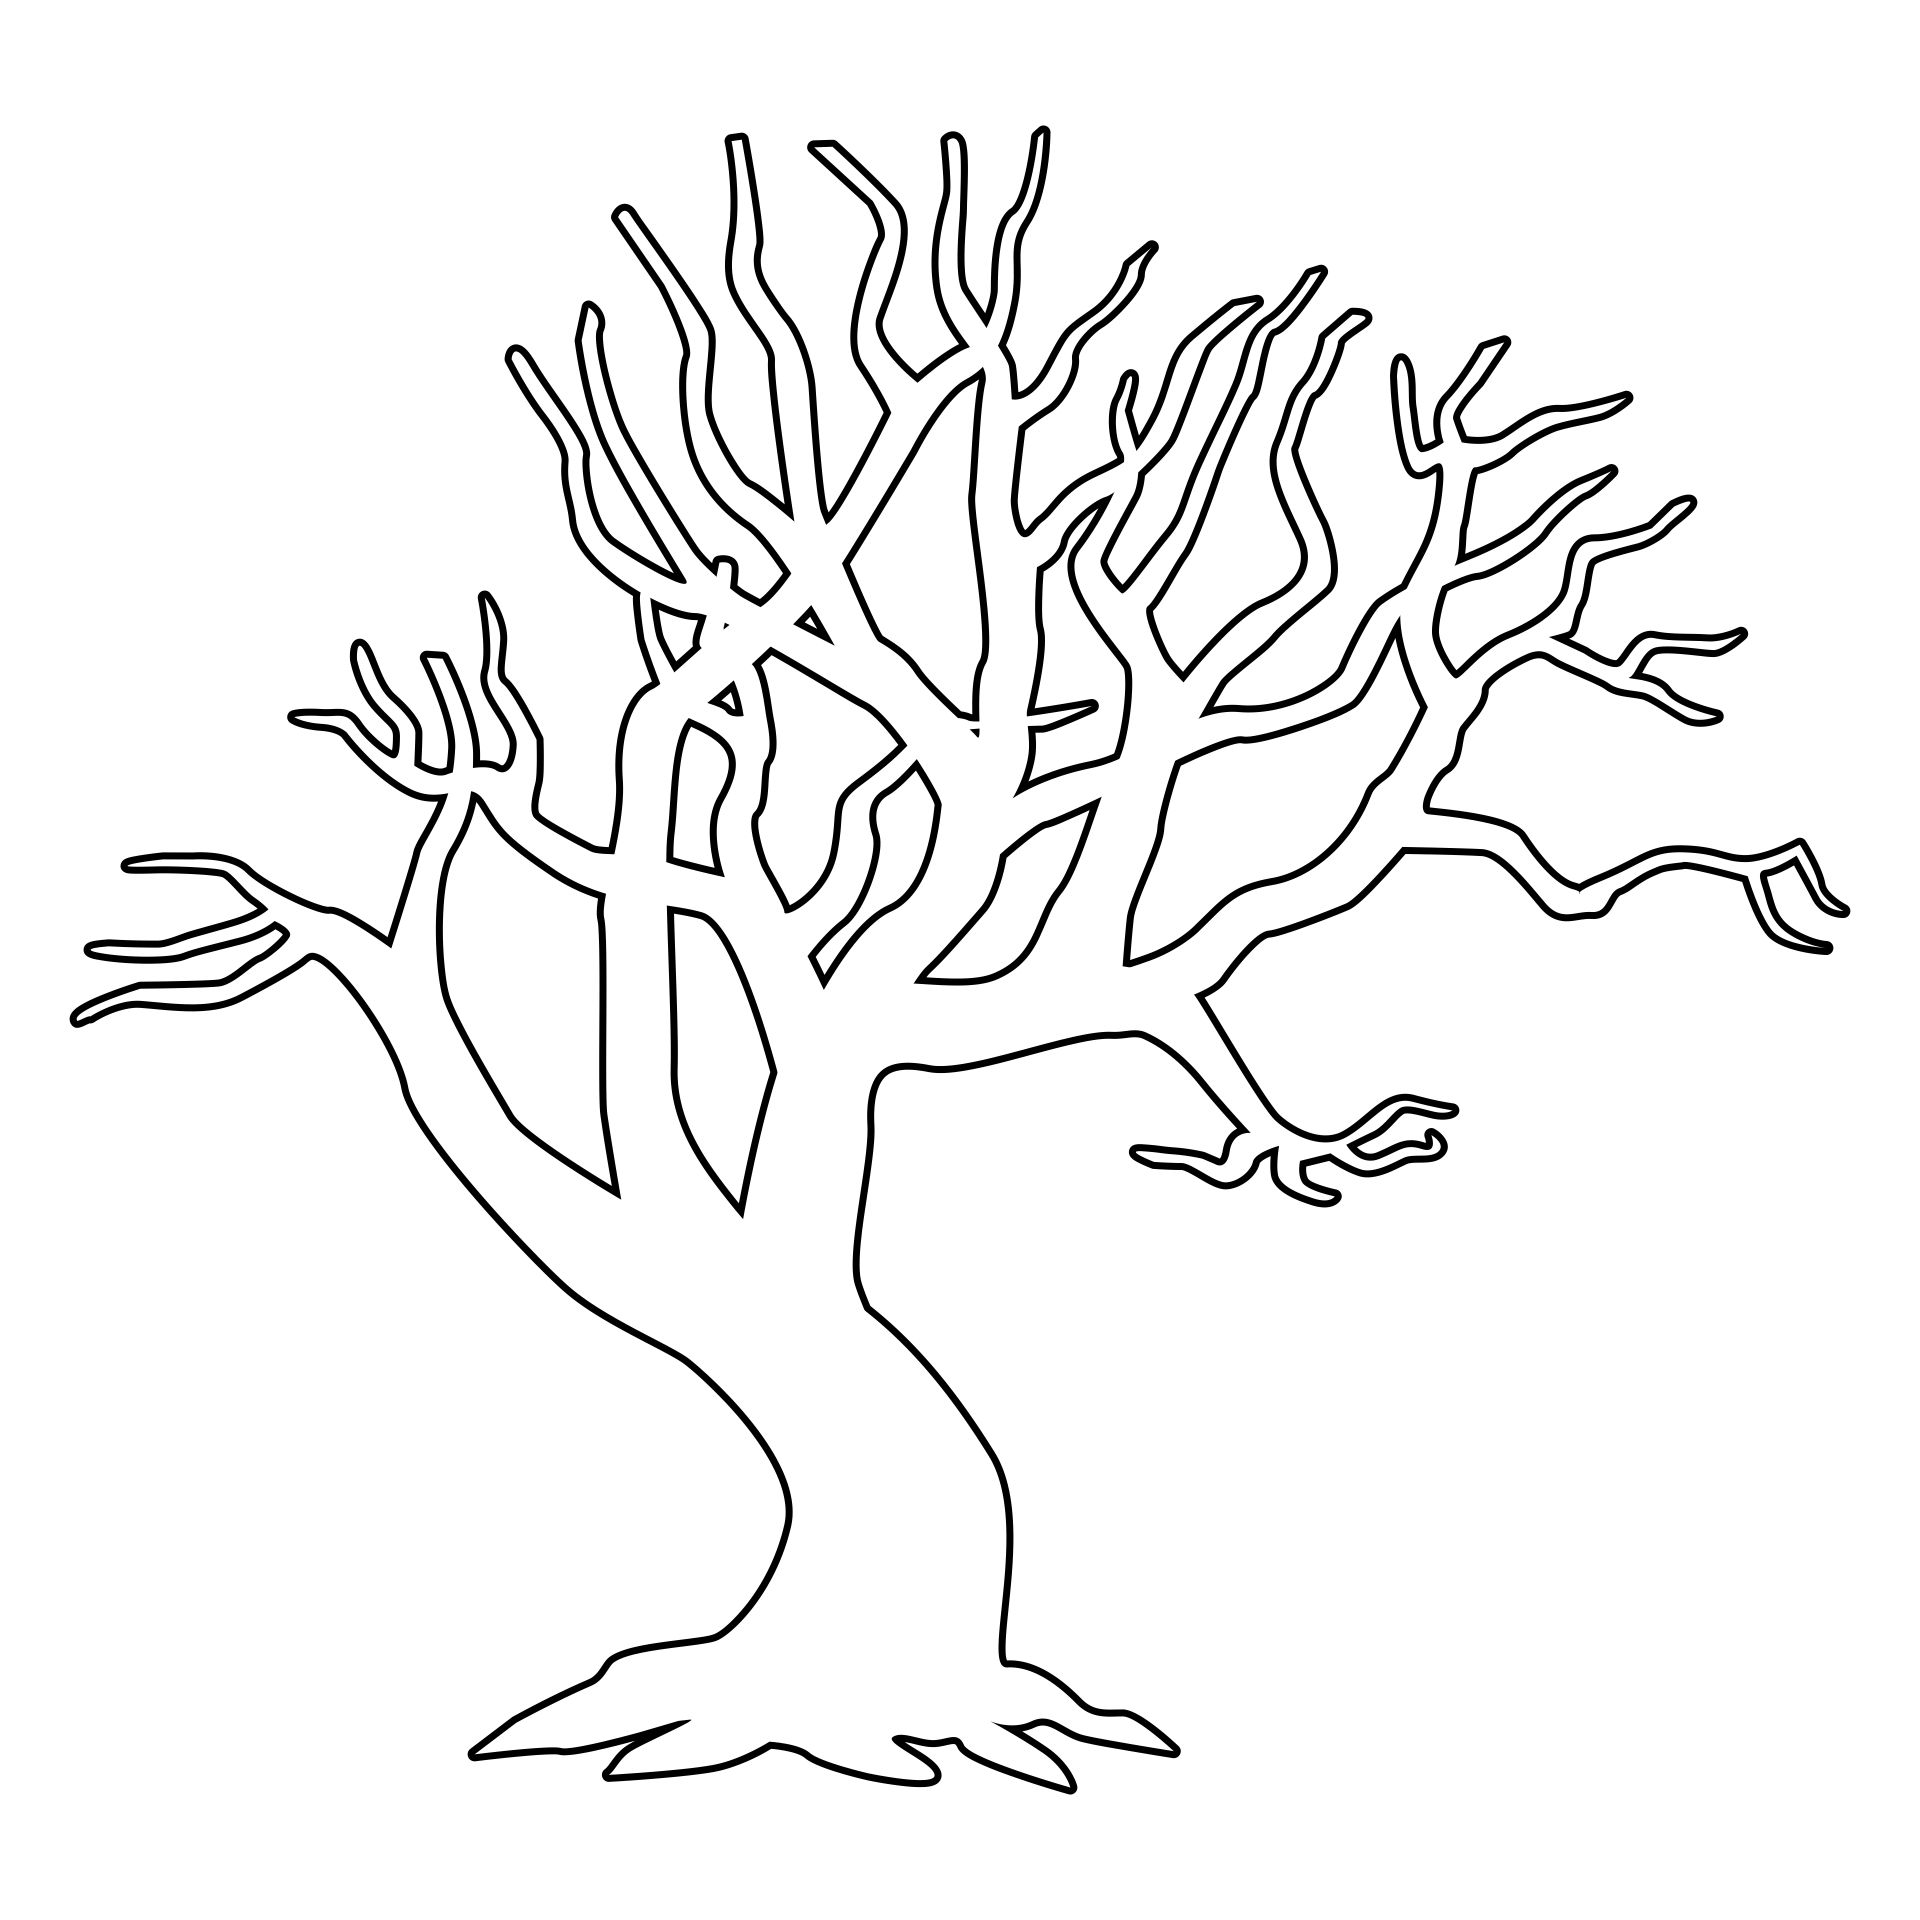 printable-tree-without-leaves-coloring-page-sketch-coloring-page